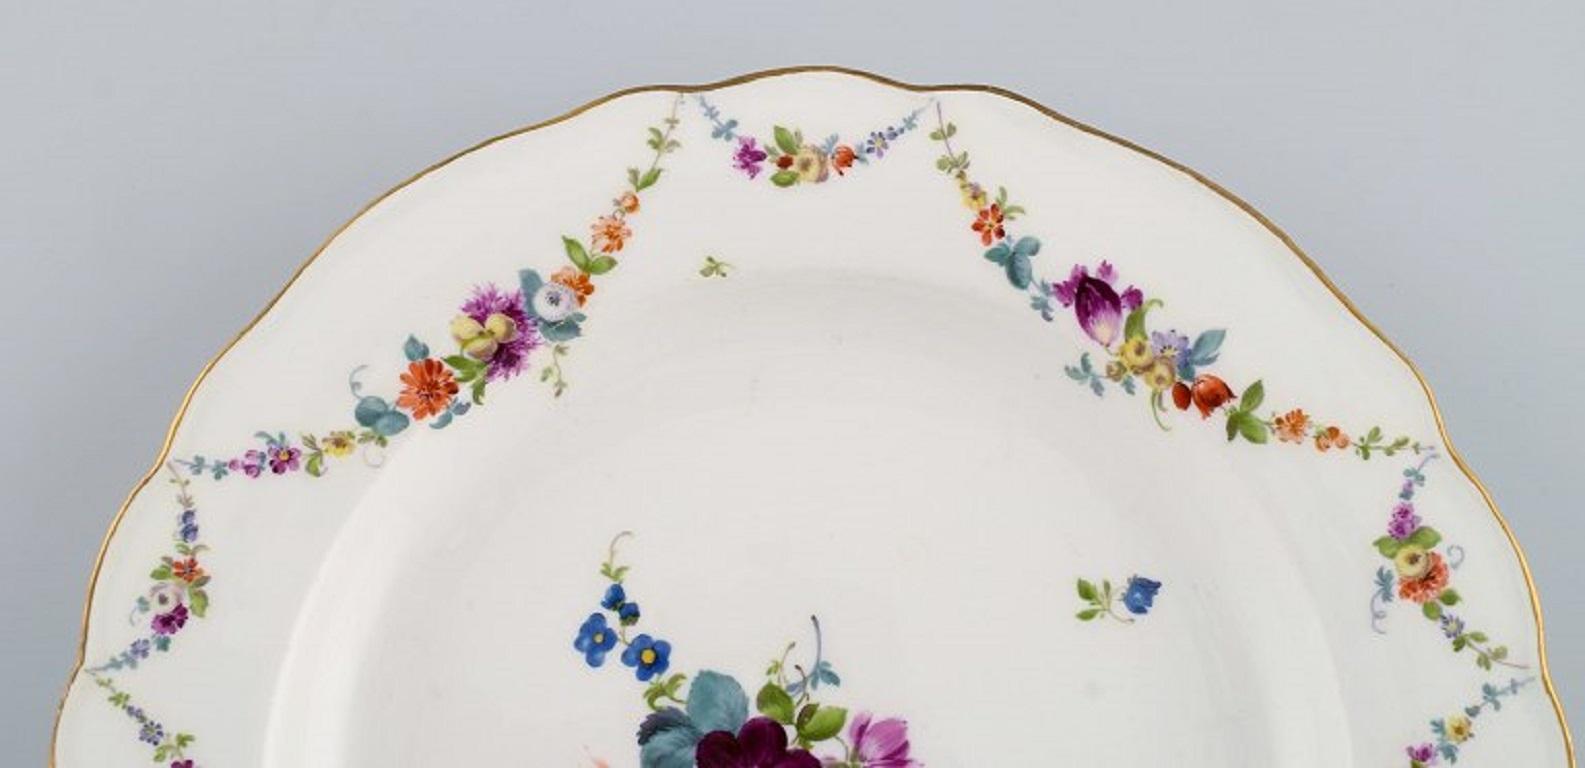 Six Antique Meissen Porcelain Plates with Hand-Painted Flowers, Late 19th C 1